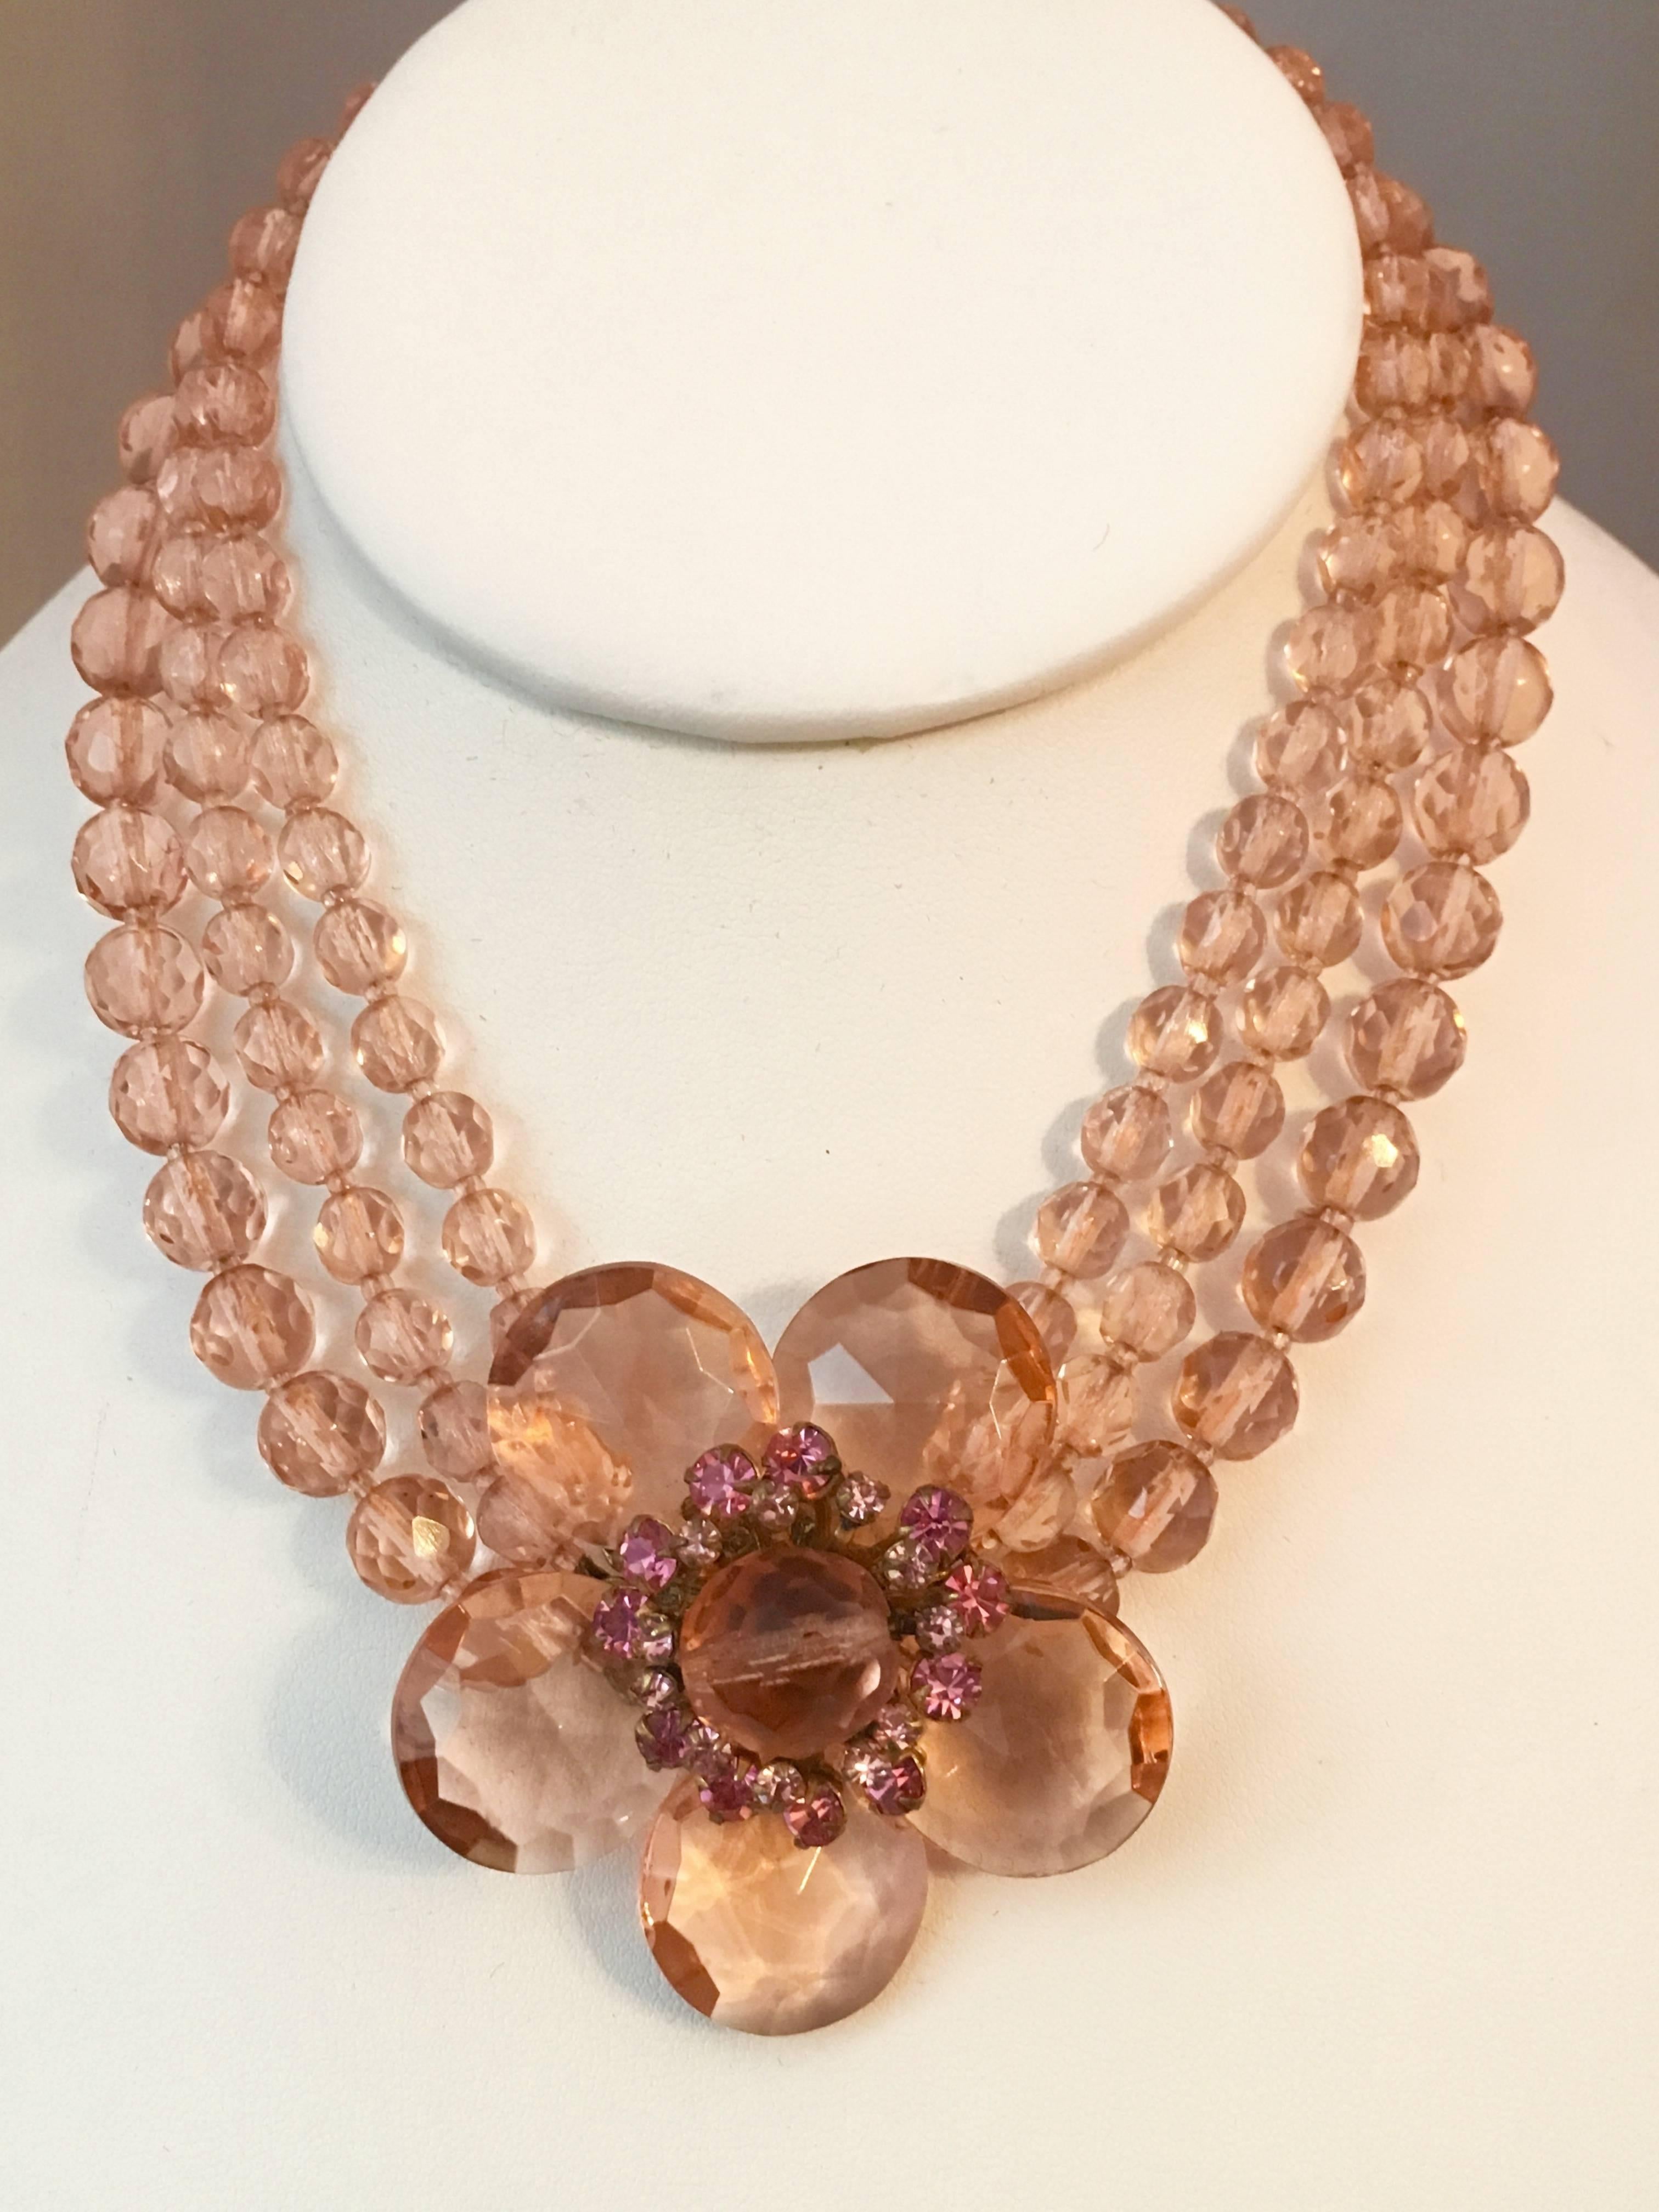 Women's Miriam Haskell 1950s Pink Floral Choker Necklace